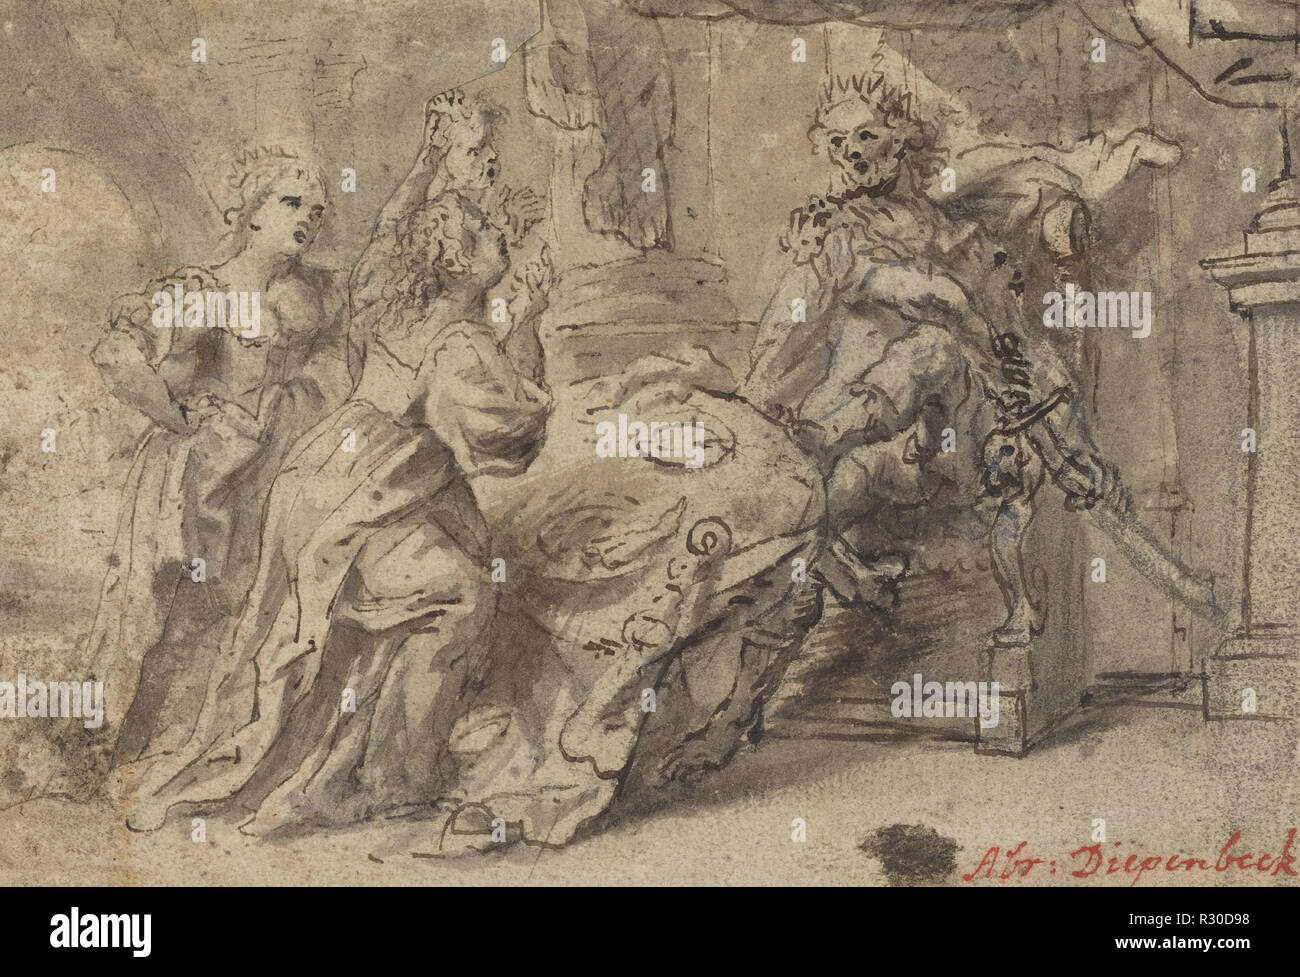 Philomela, Procne, and the Thracian King Tereus. Dimensions: overall (approximate): 10.5 x 15.4 cm (4 1/8 x 6 1/16 in.). Medium: pen and brown ink with gray wash on laid paper. Museum: National Gallery of Art, Washington DC. Author: Follower of Abraham van Diepenbeeck. Stock Photo